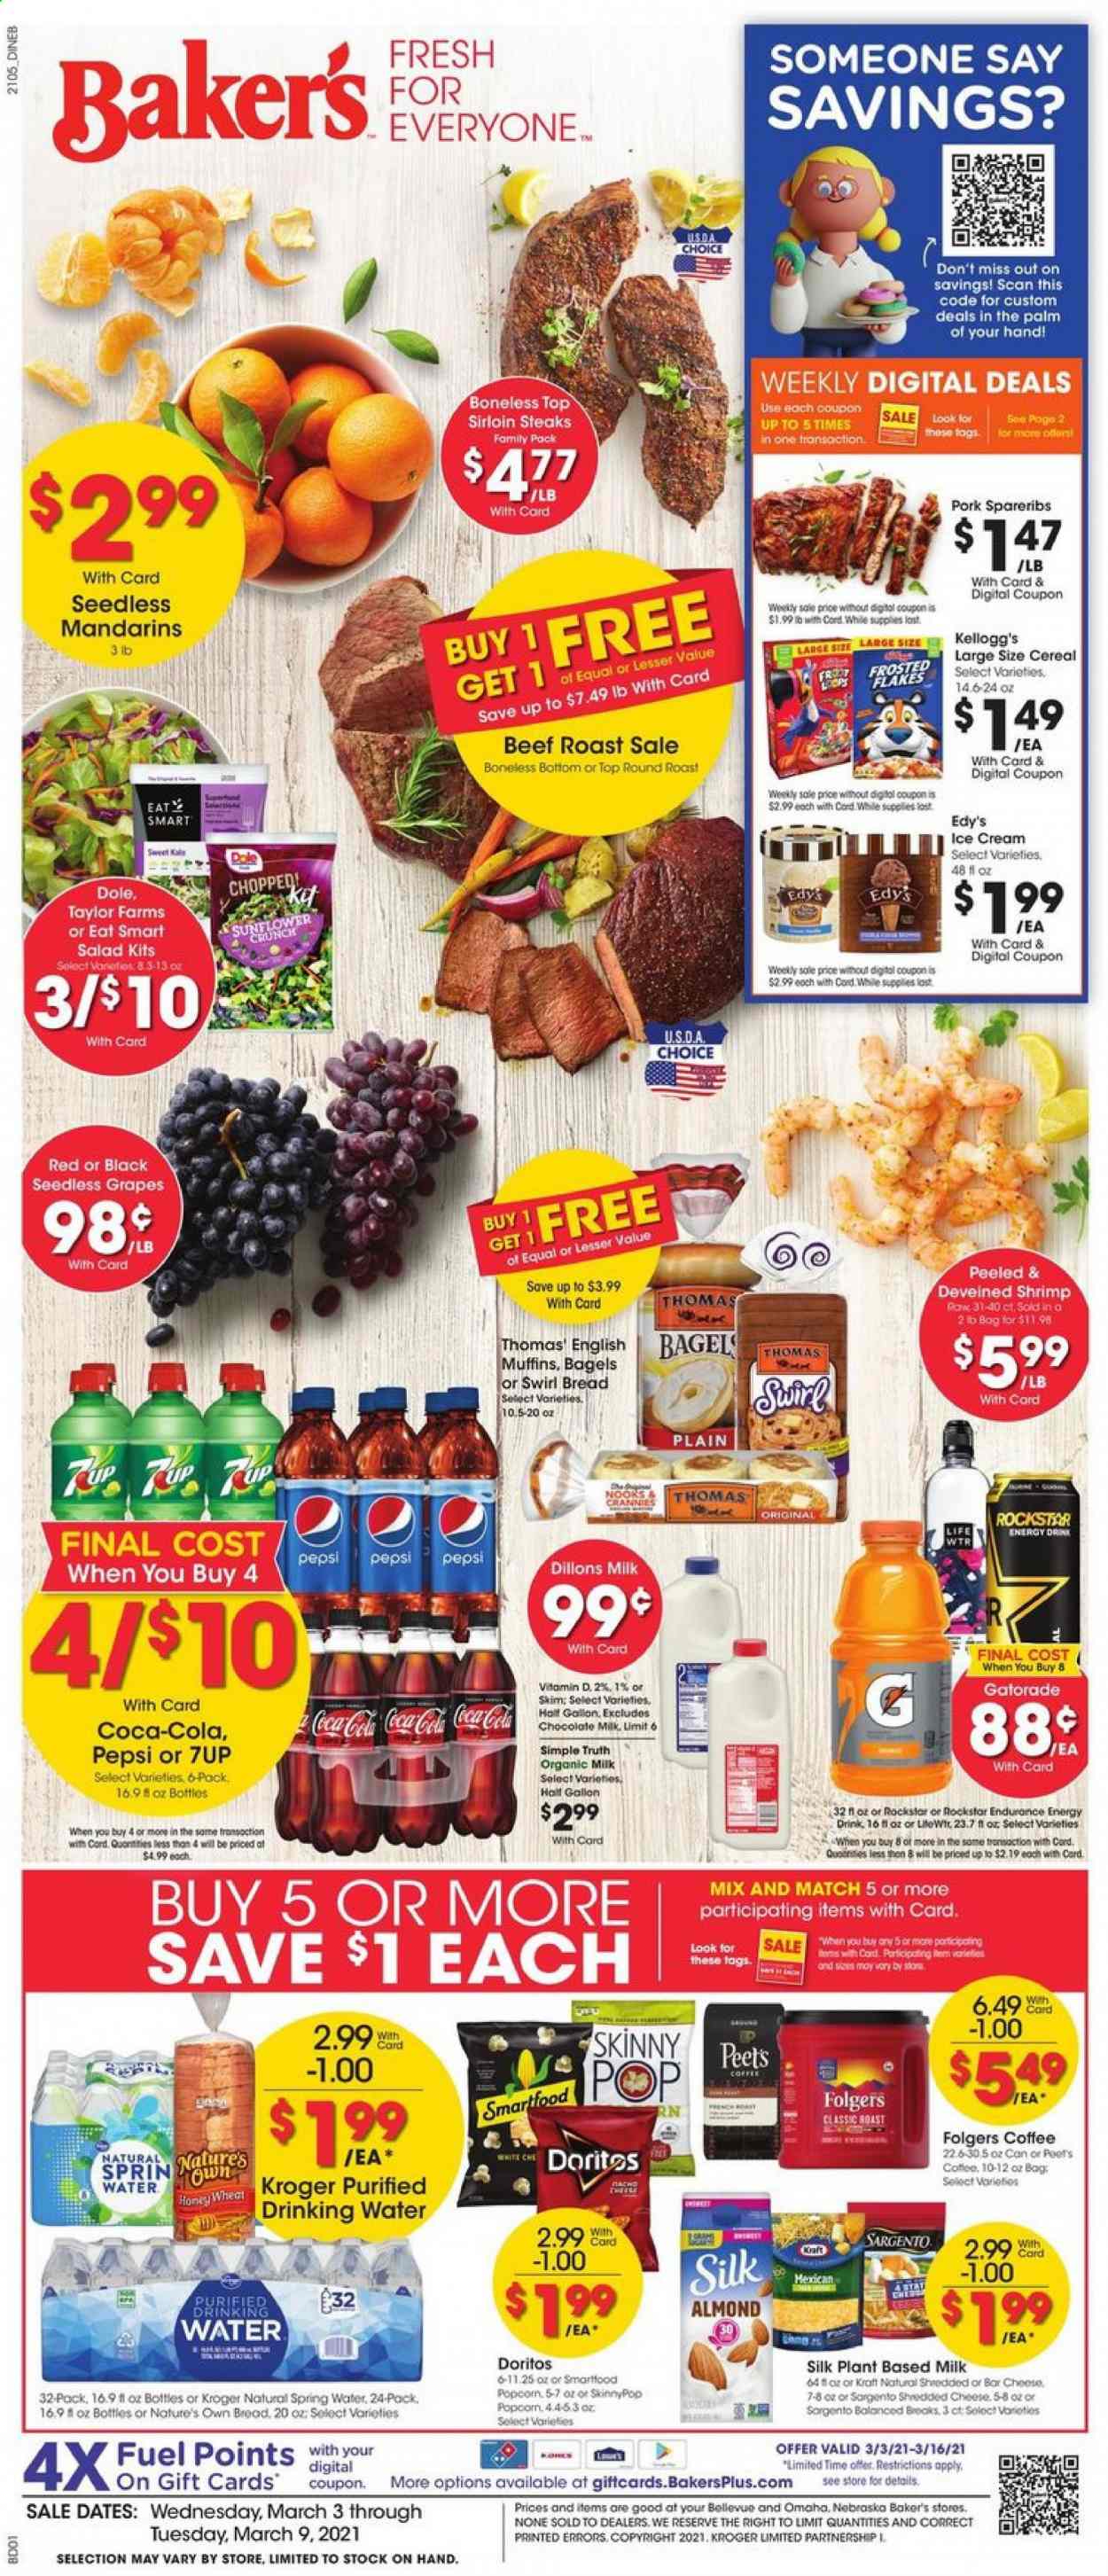 thumbnail - Baker's Flyer - 03/03/2021 - 03/09/2021 - Sales products - seedless grapes, Dole, bread, bagels, muffin, shrimps, english muffins, salad, Kraft®, cheese, Sargento, organic milk, Silk, ice cream, Kellogg's, Doritos, Smartfood, mandarines, cereals, Frosted Flakes, almonds, Coca-Cola, Pepsi, energy drink, 7UP, Rockstar, Gatorade, spring water, coffee, Folgers, L'Or, beef meat, steak, round roast, roast beef, sirloin steak, pork spare ribs, Sure, gallon, sunflower, Nature's Own. Page 1.